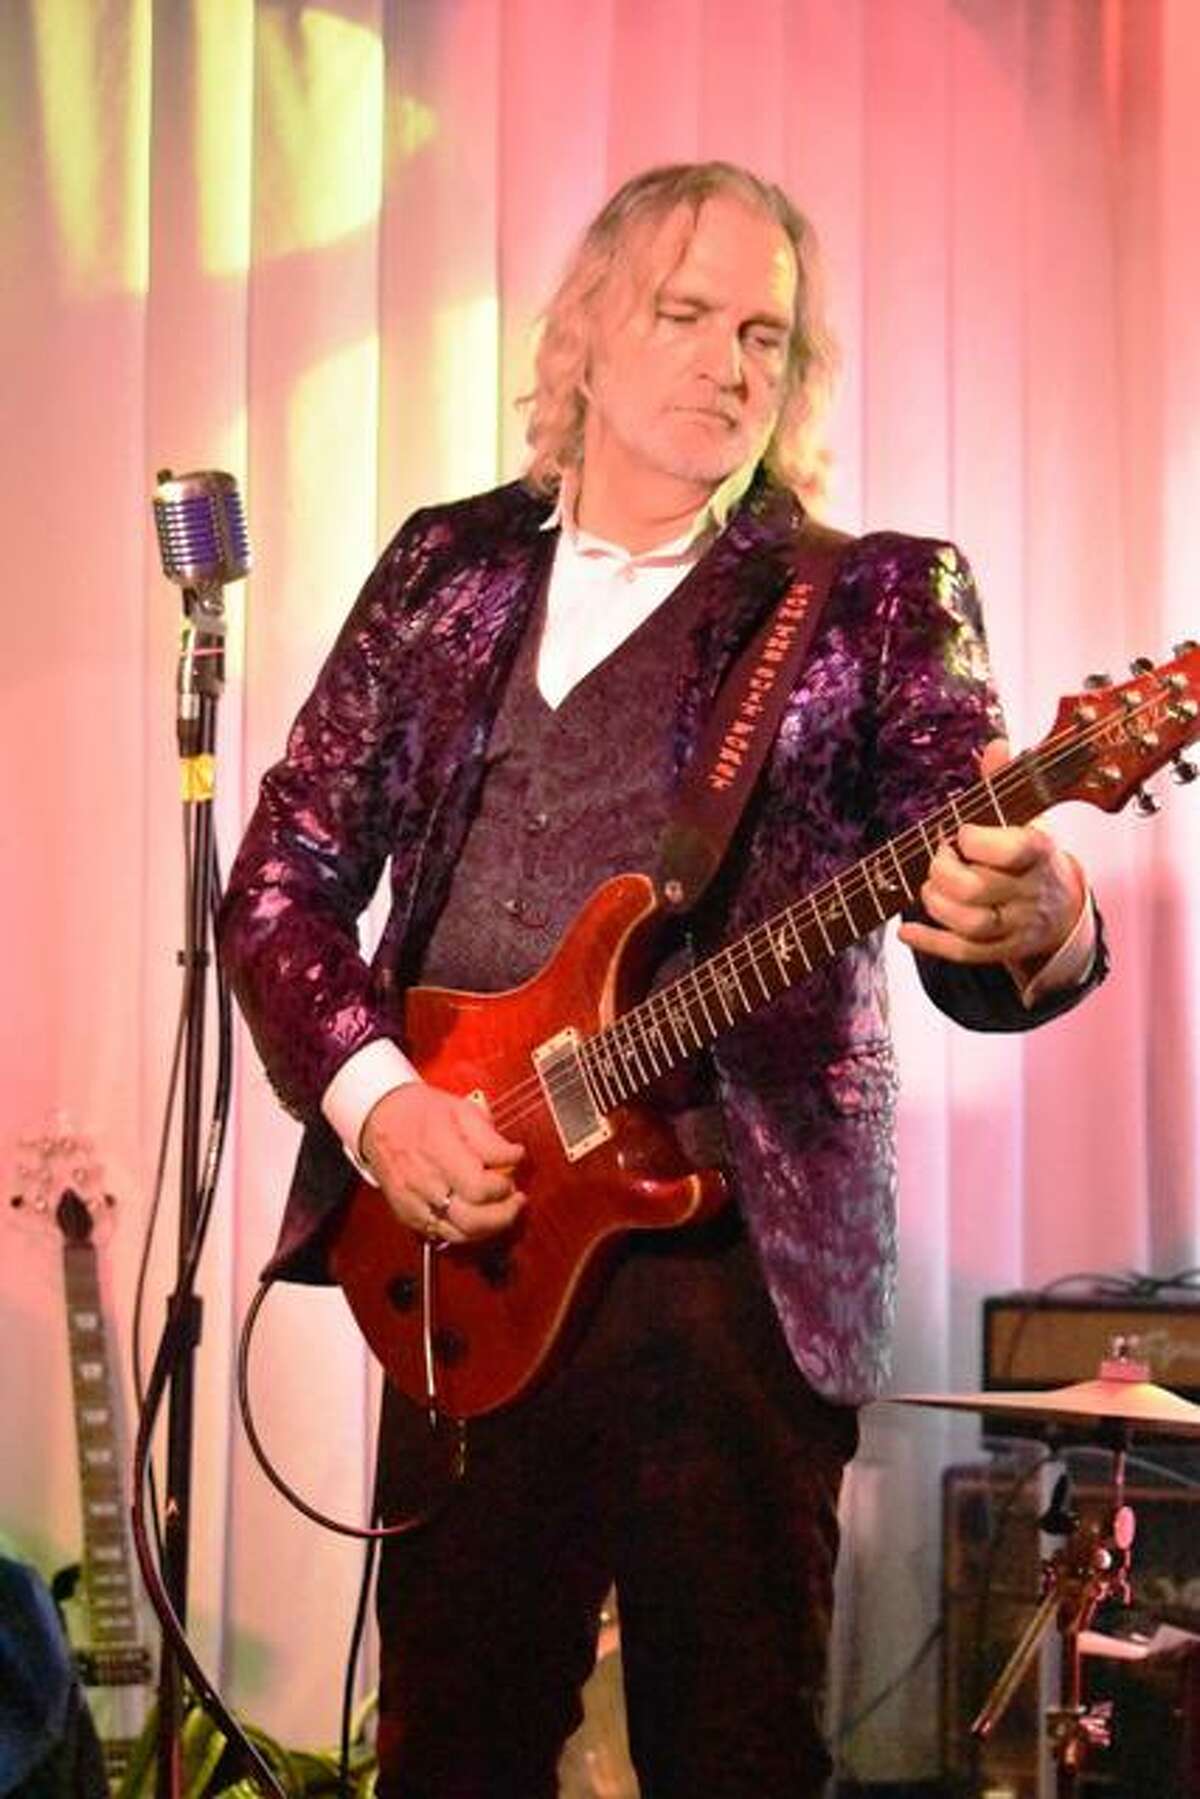 Tom “The Suit” Forst is playing at Black-Eyed Sally’s Saturday.